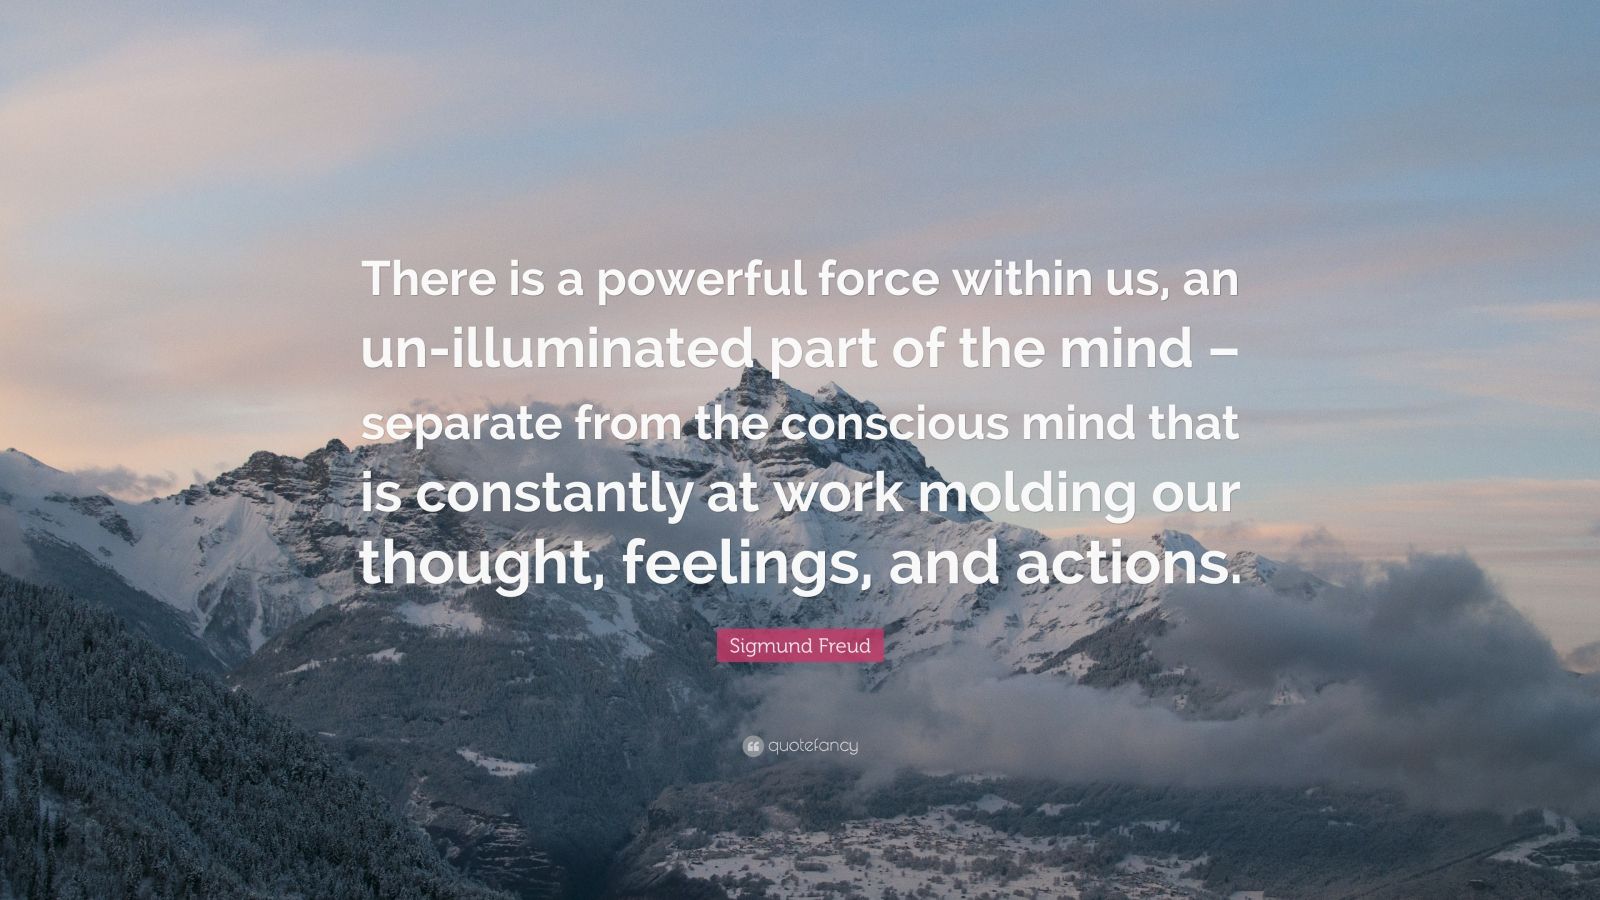 Sigmund Freud Quote: “There is a powerful force within us, an un ...